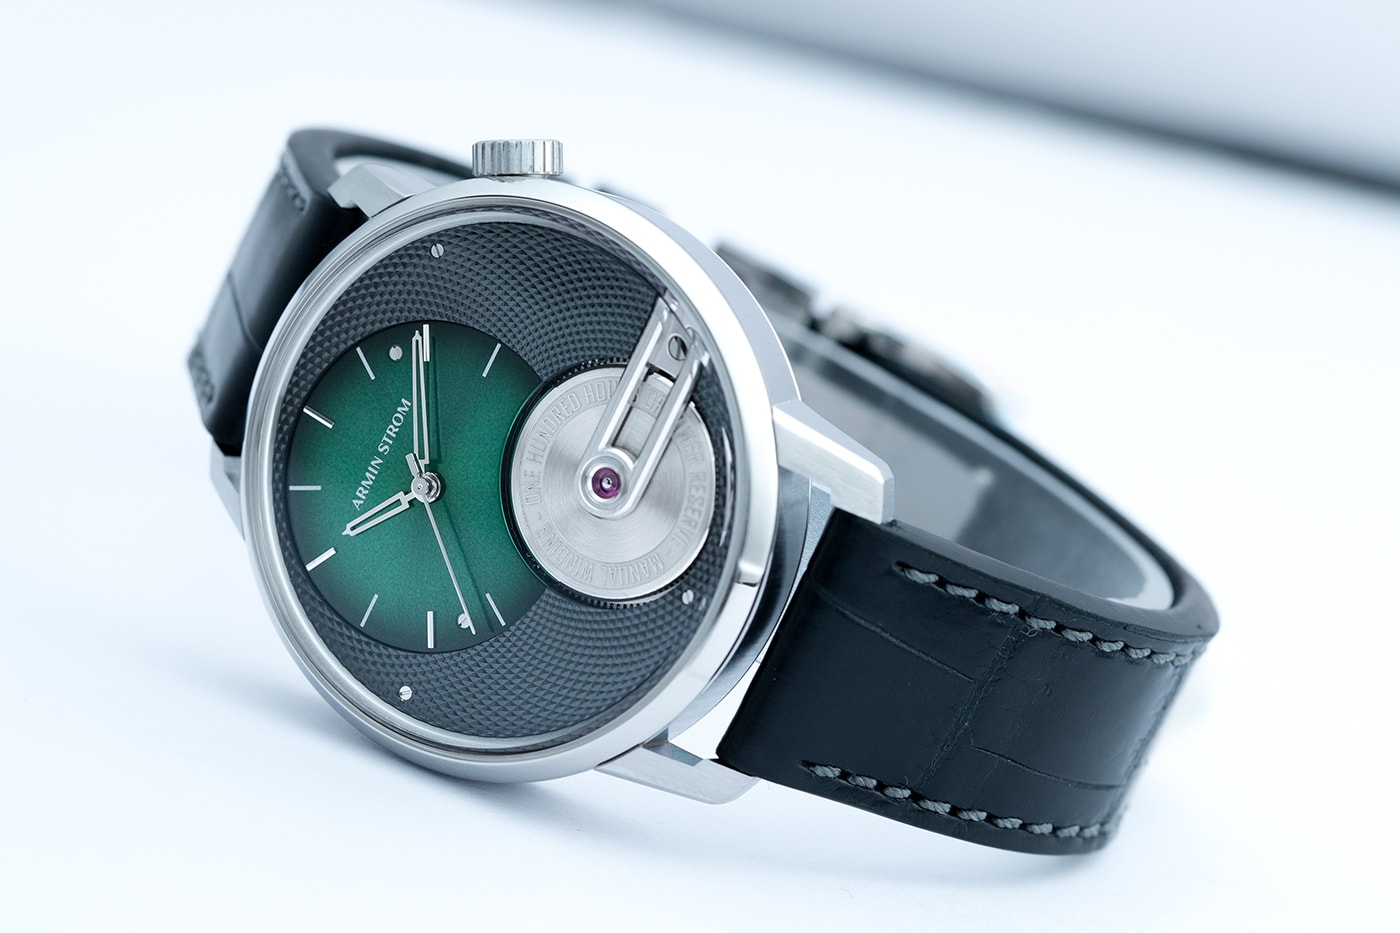 Armin Strom Tribute 1 Fumé Green Watch Limited-Edition Release Info 